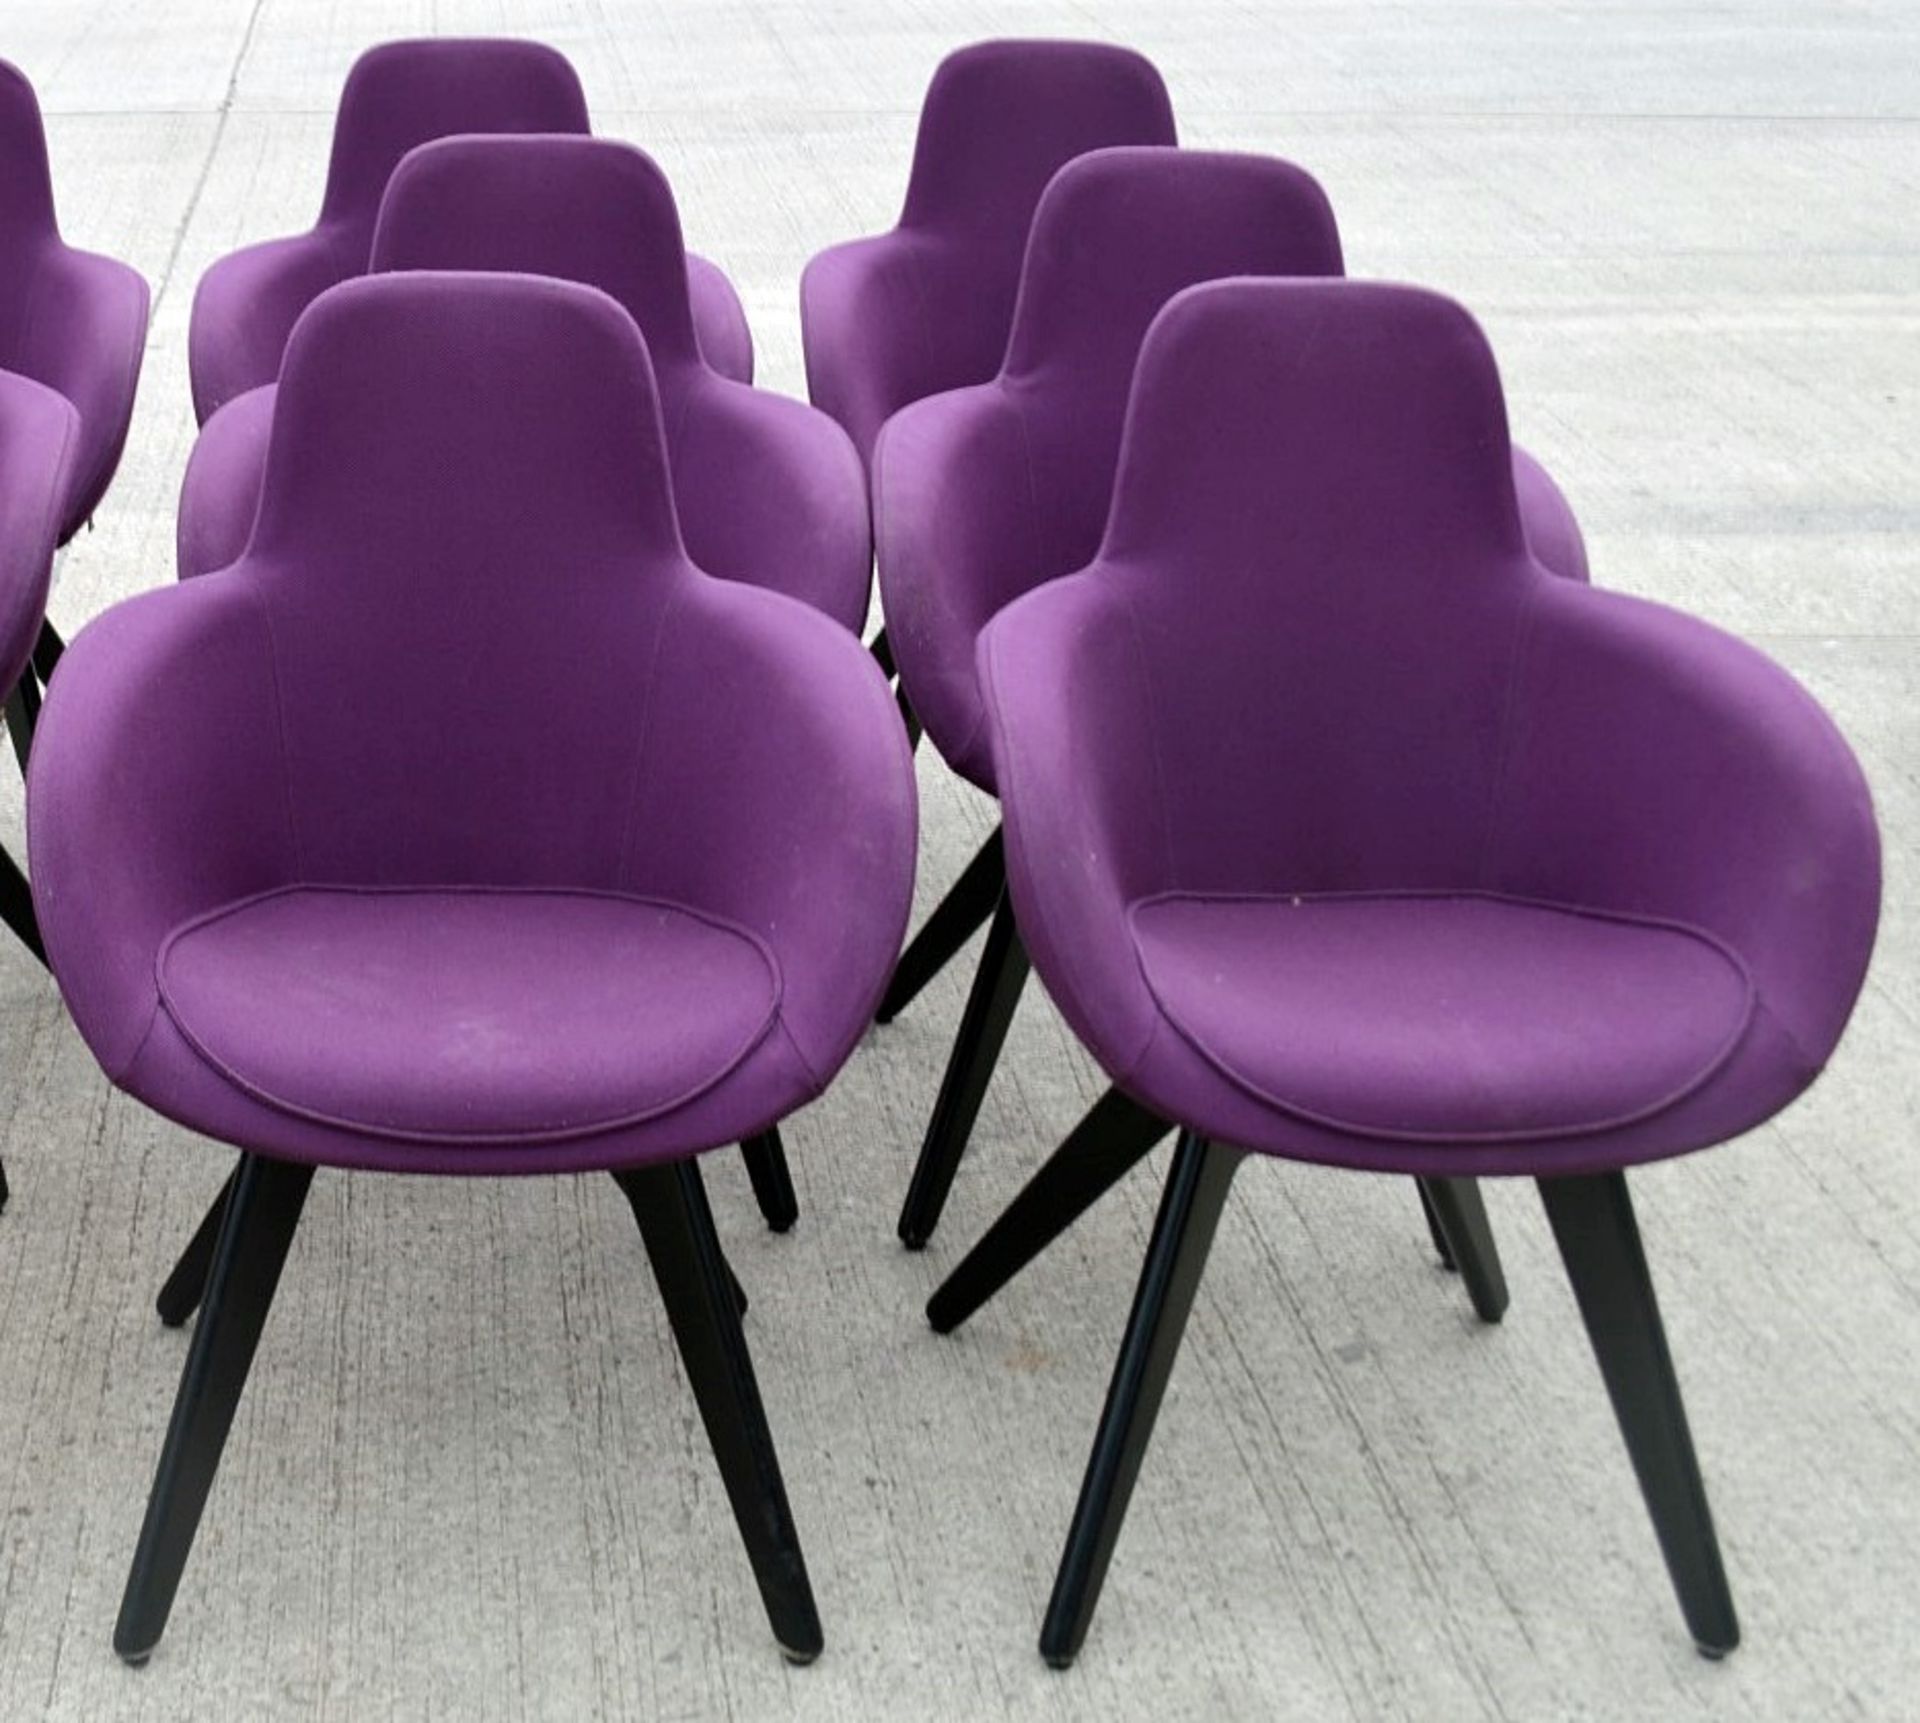 1 x TOM DIXON High Back Designer Scoop Chair - Upholstered In A Vibrant Purple Mollie Melton - Image 2 of 4